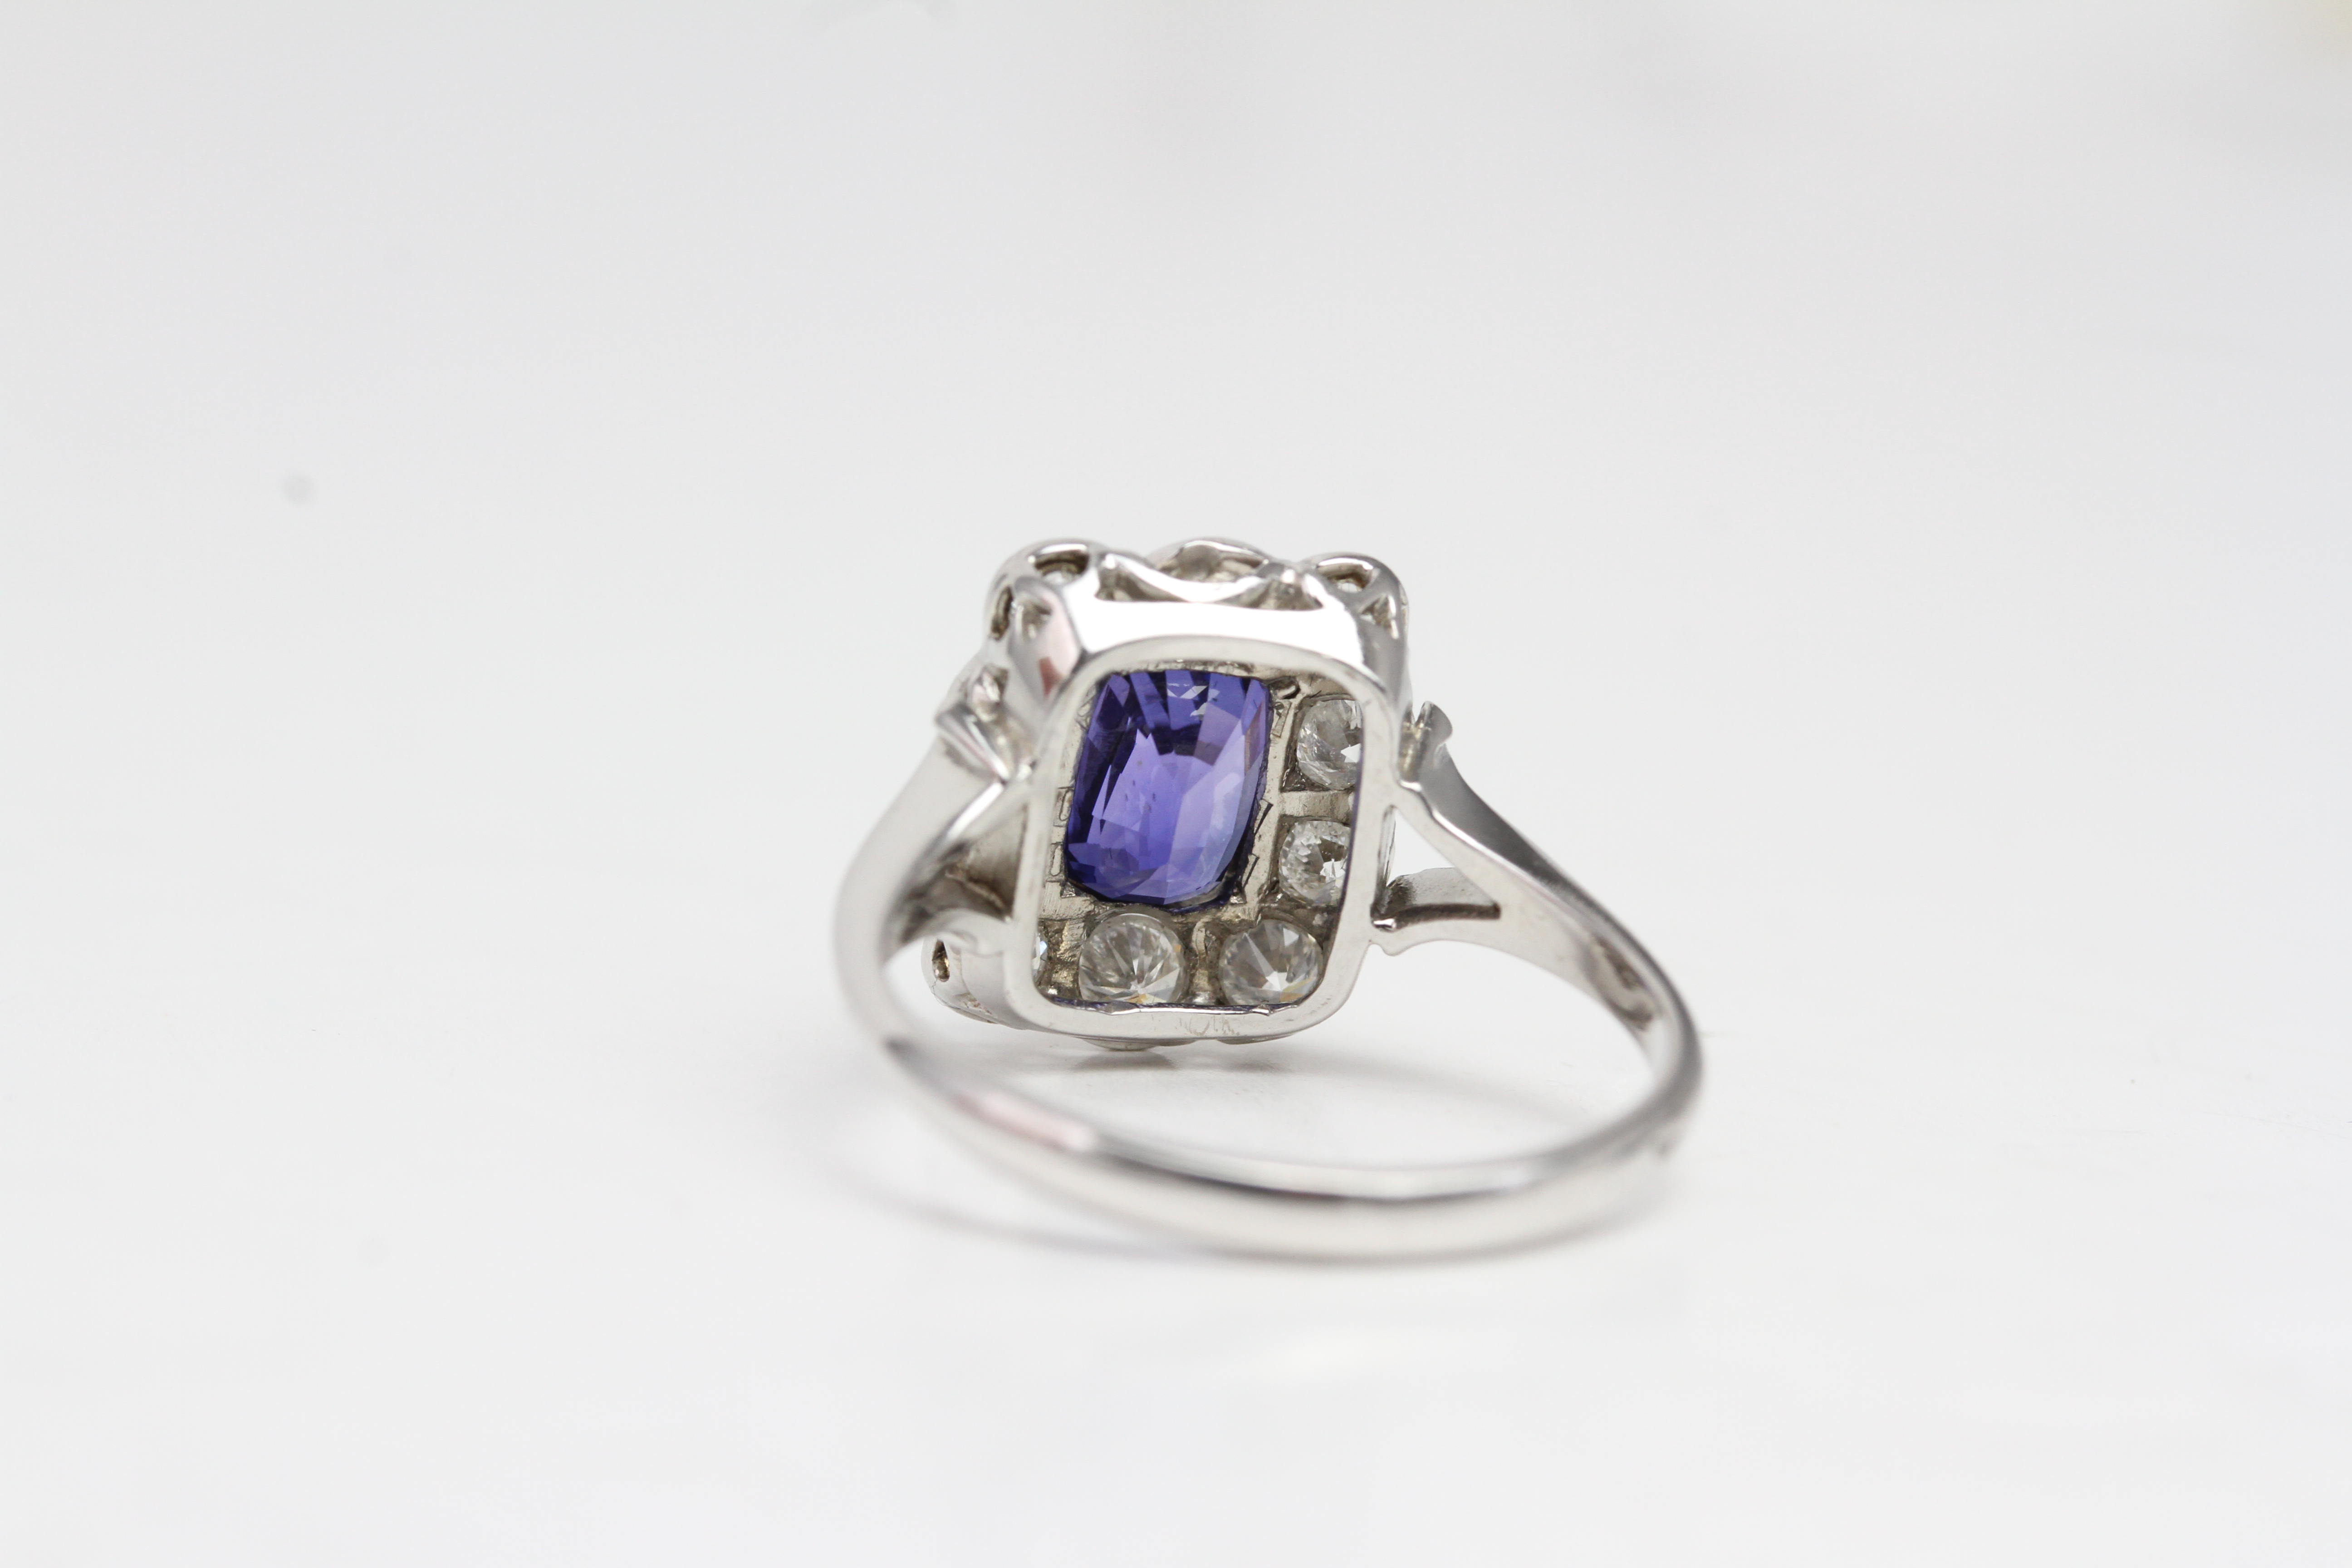 18 white gold sapphire and diamond cluster ring with split shank. The central sapphire is set in a - Image 3 of 3